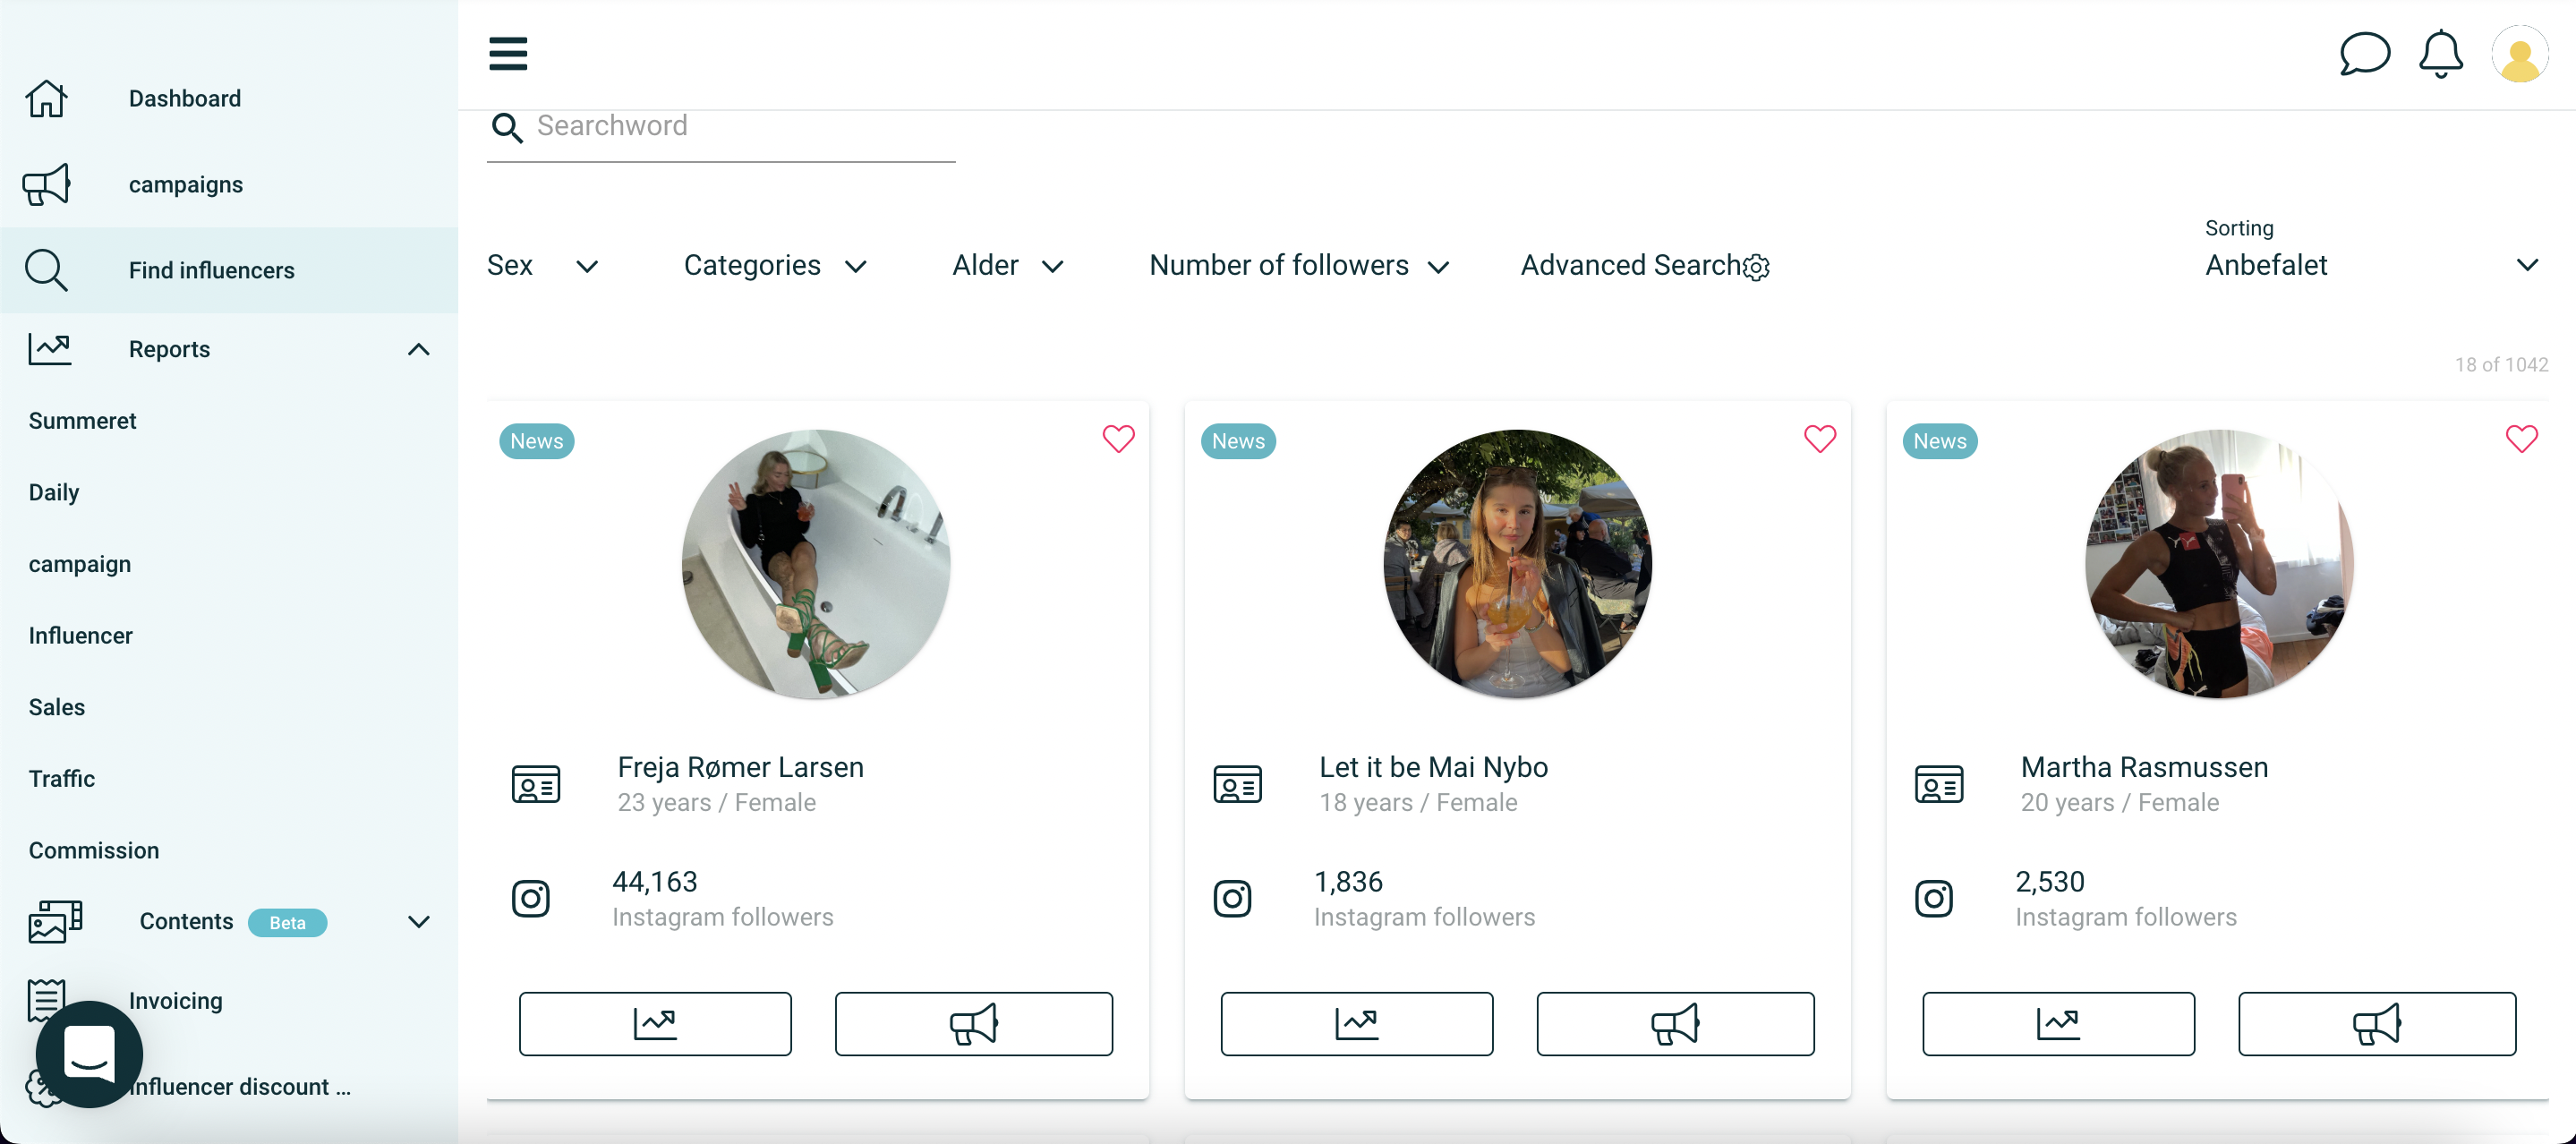 Discover & Recruit verified influencers - Discover and thousands of verified and active influencers, and screen them based on several real time data points. When you find the right ones, chat with them and recruit them to your active campaigns.